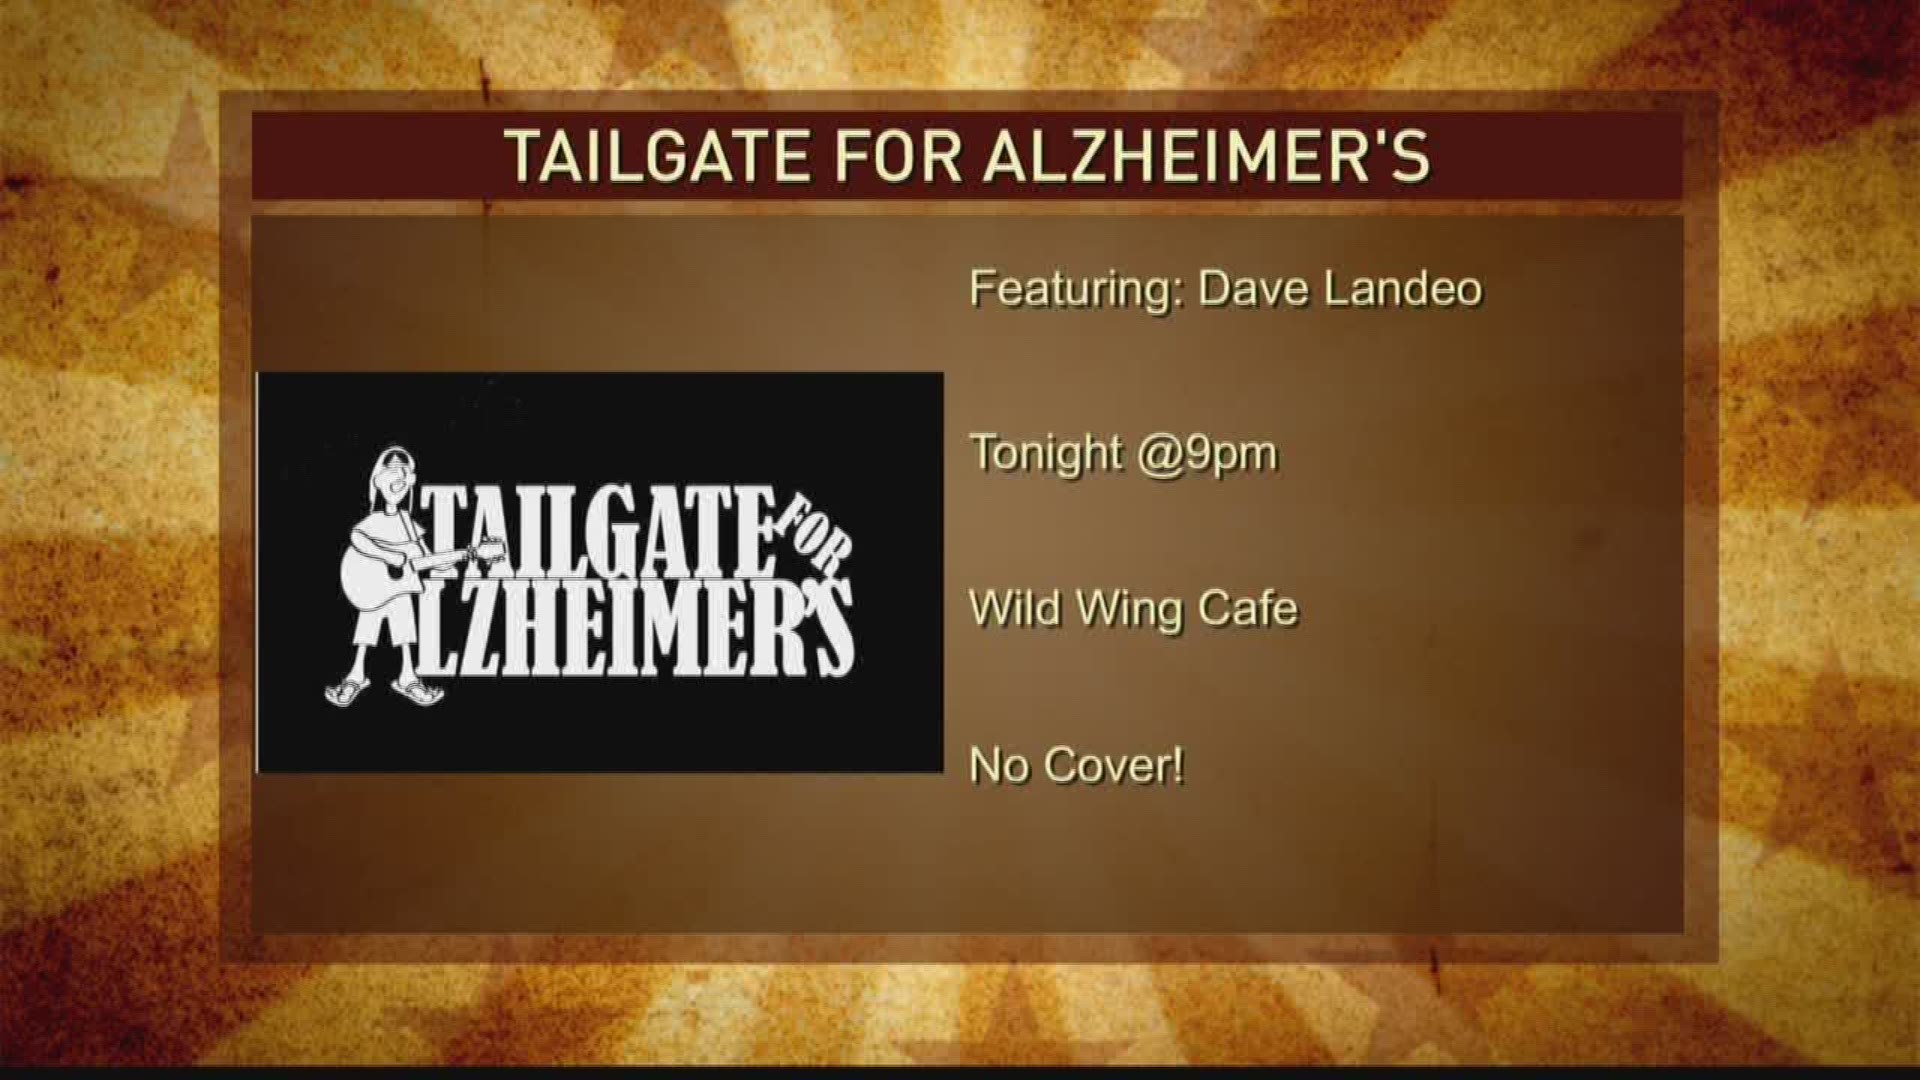 Musician Dave Landeo returns to Knoxville for a special Tailgate Party at Wild Wing Cafe to raise money for Alzheimer's 